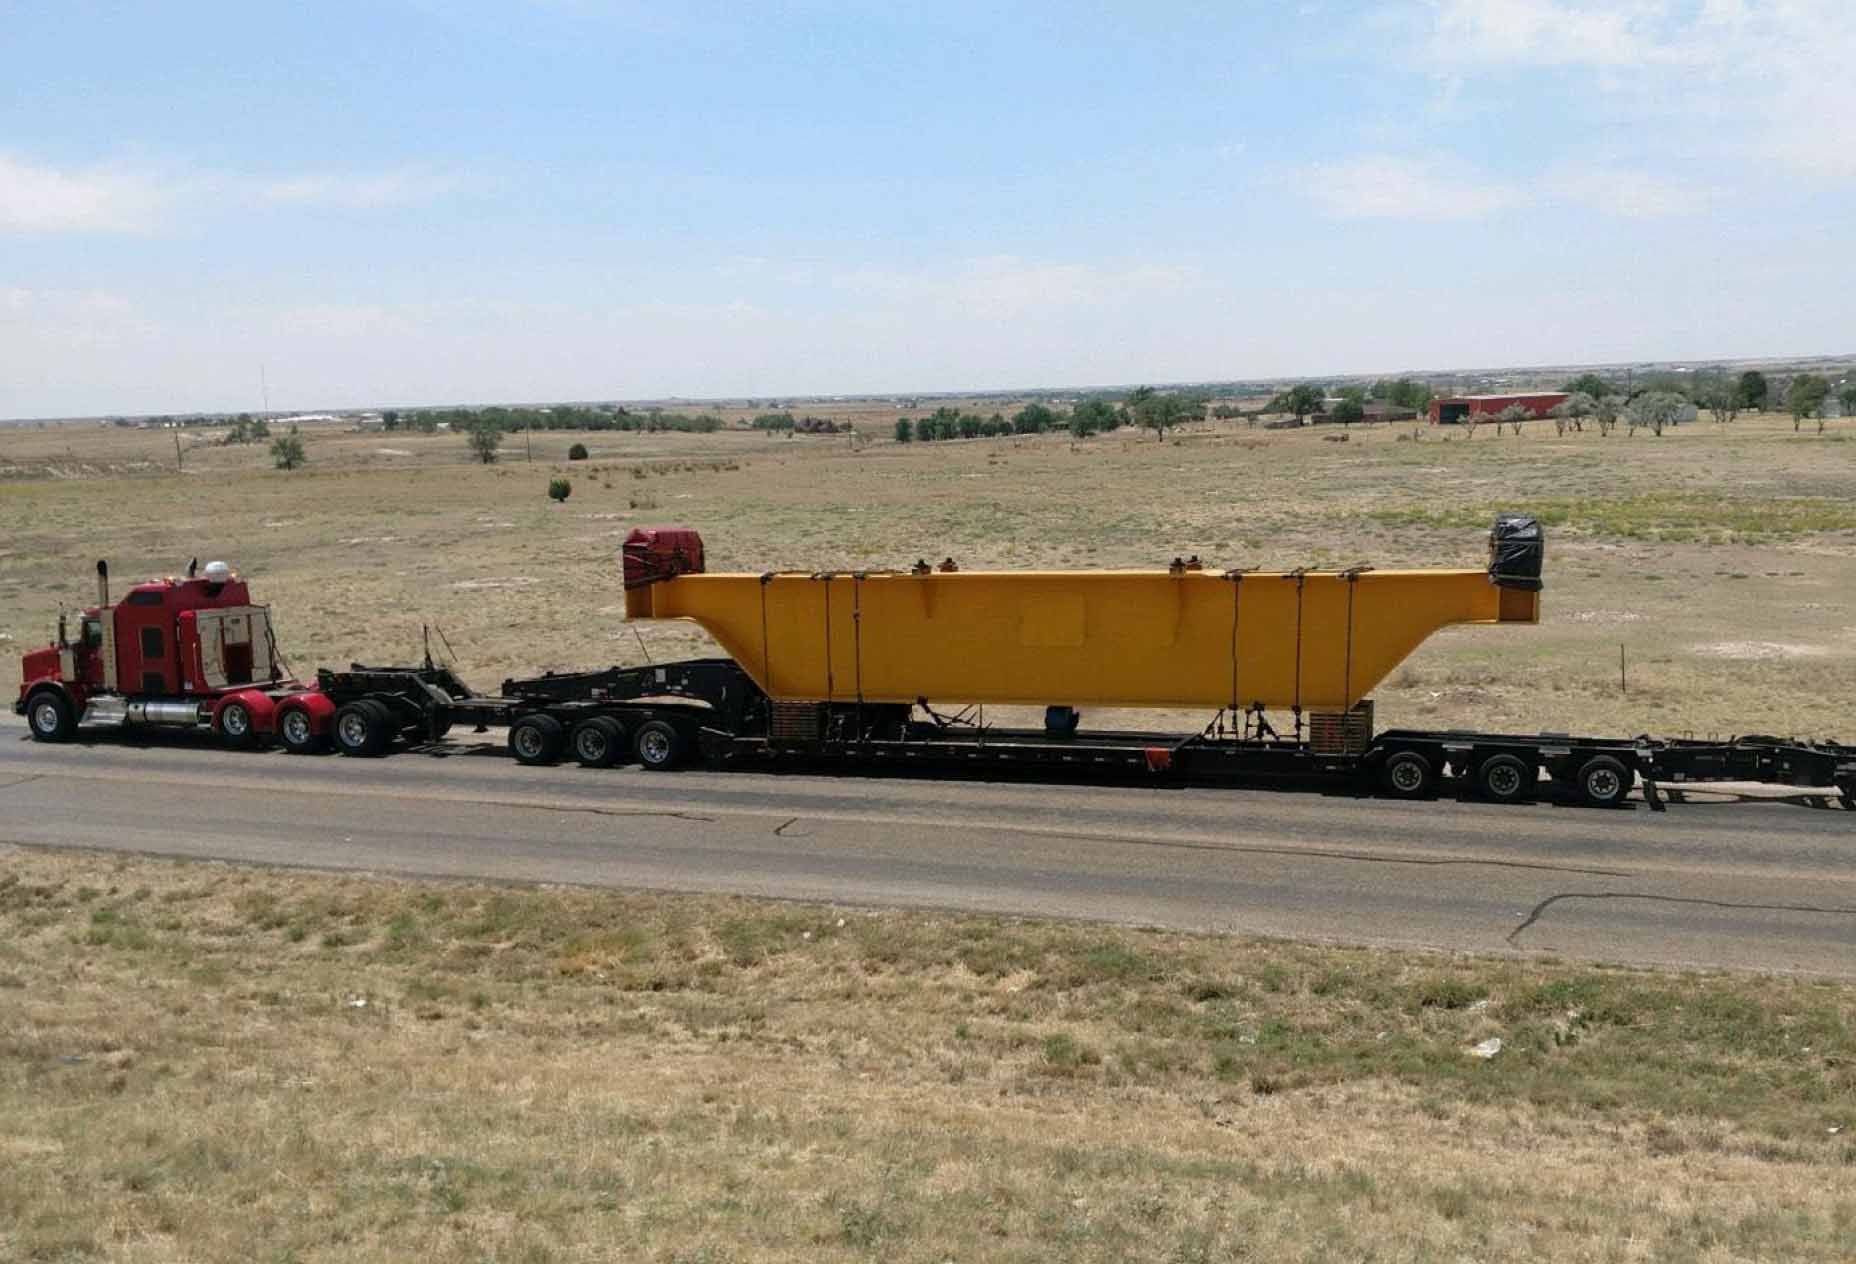 An oversized freight truck with a low bed carrying a large yellow metal piece travels down a highway surrounded by fields.